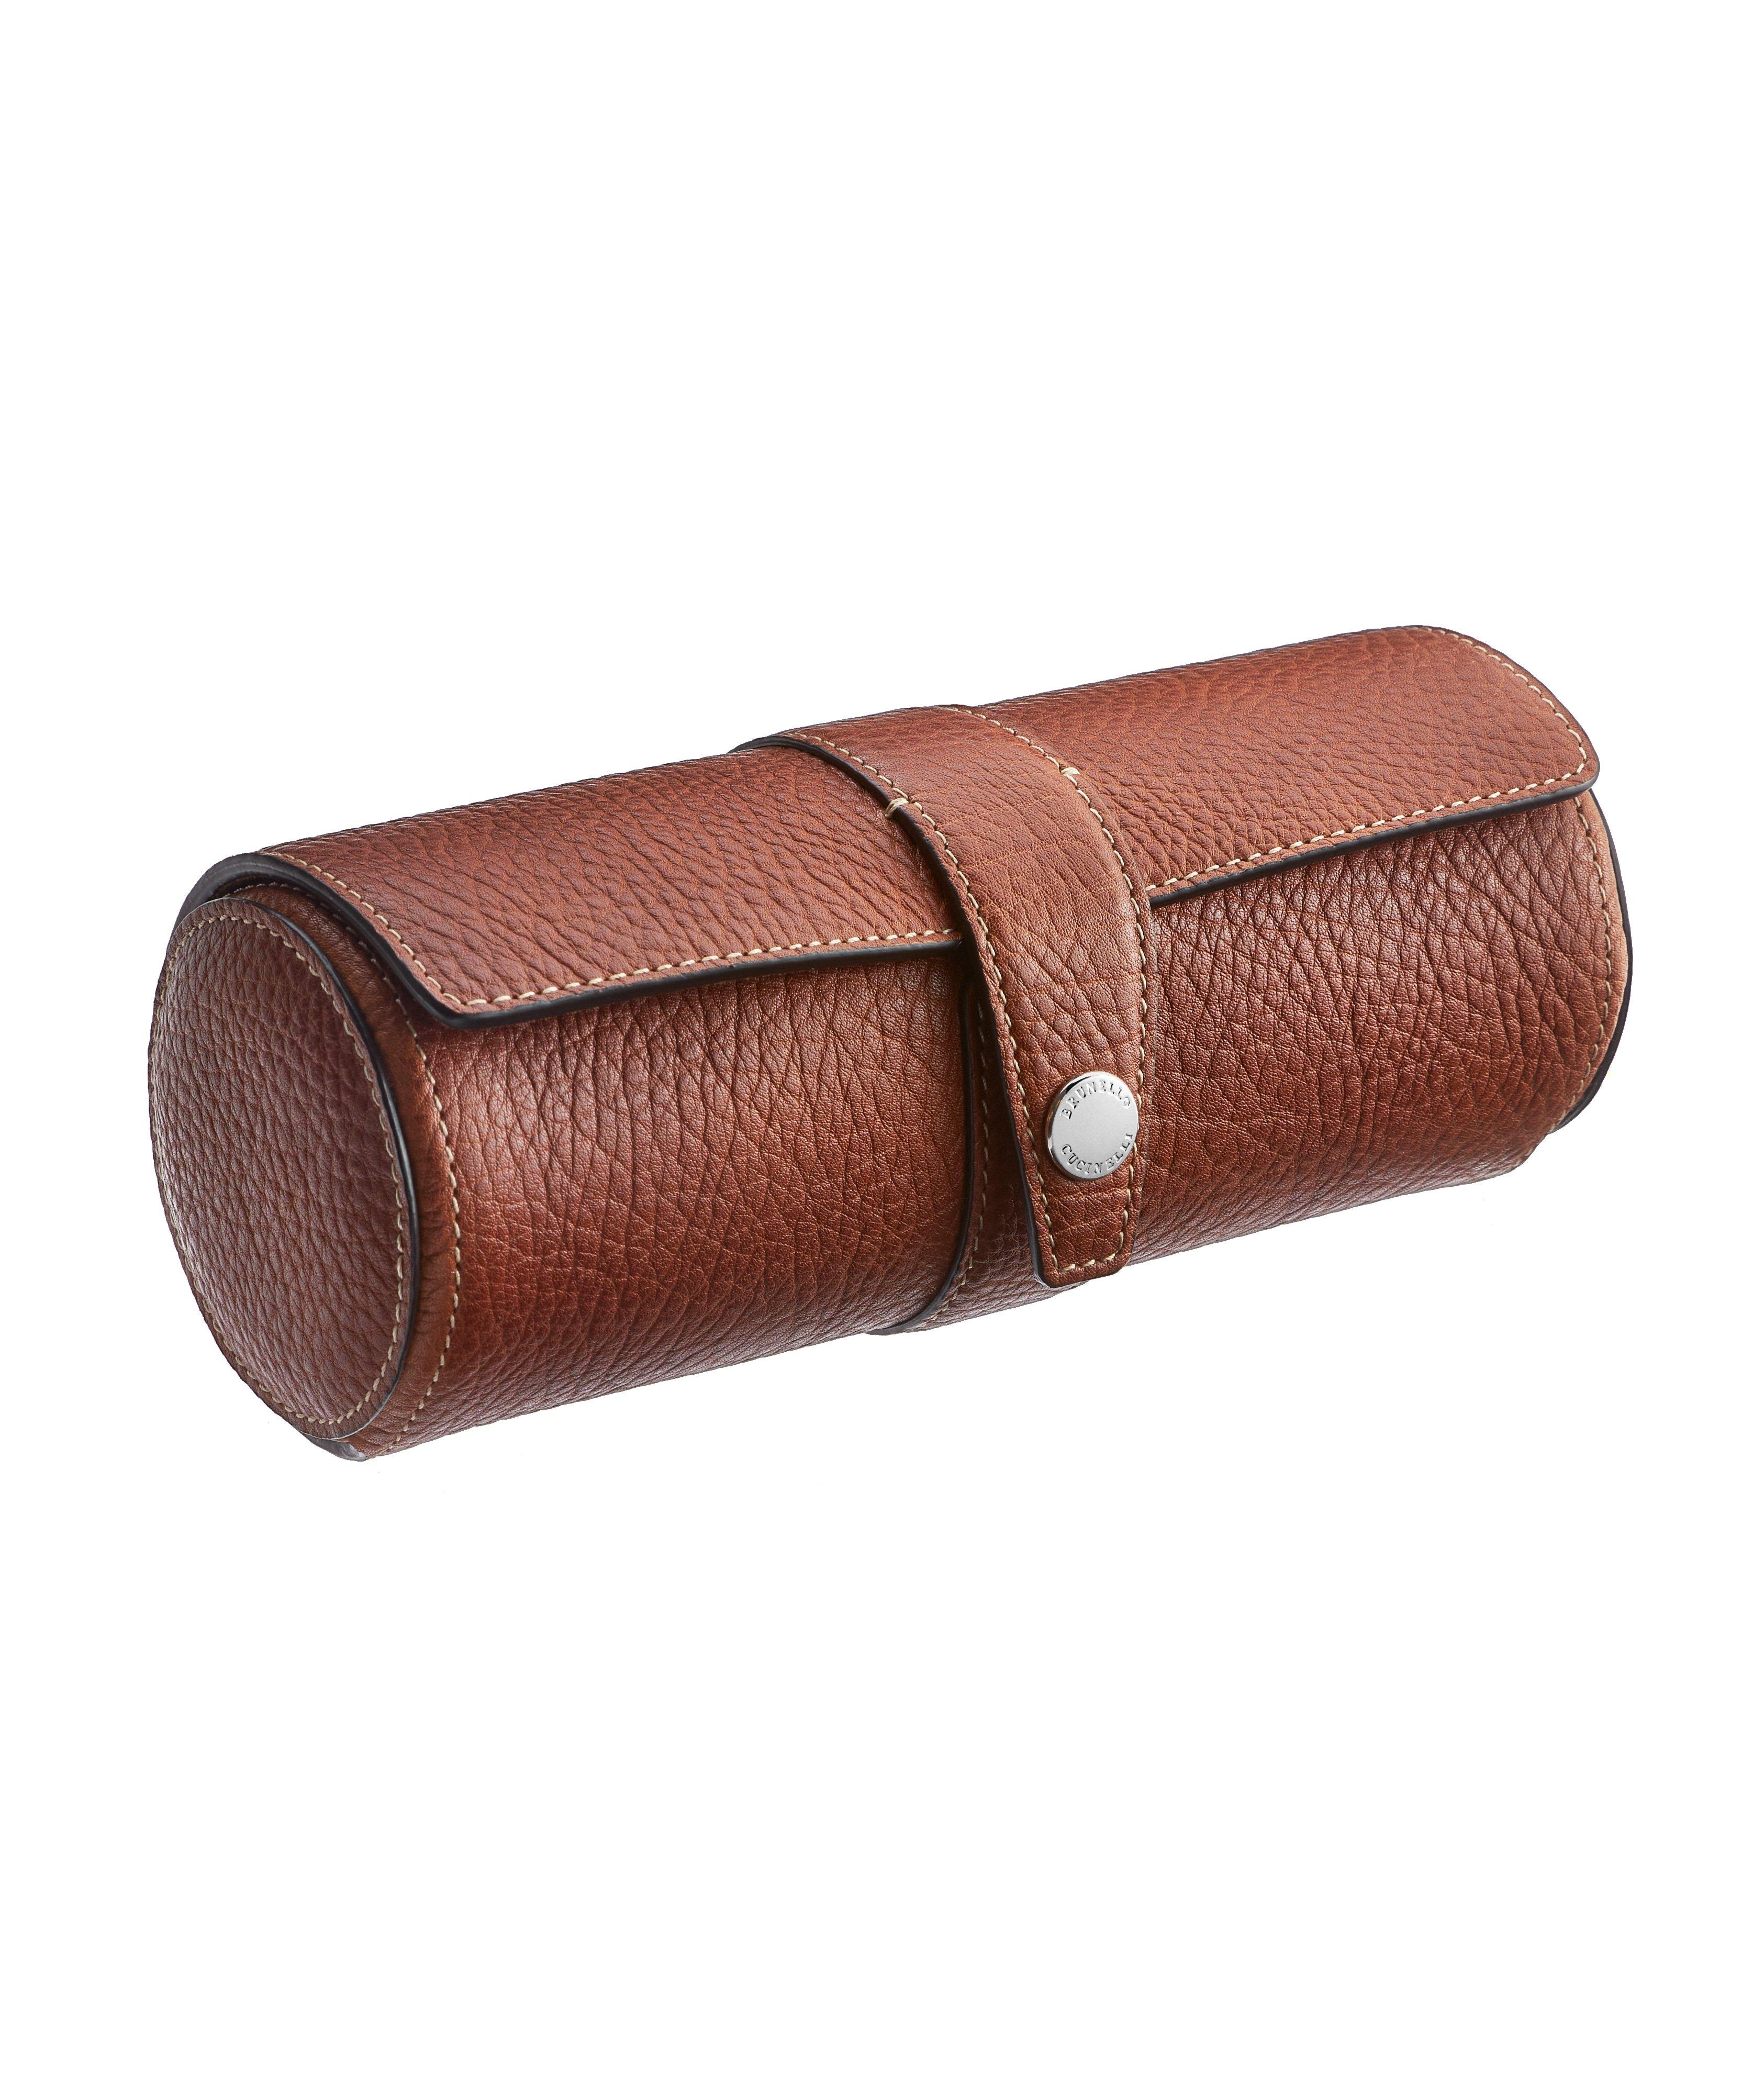 Grain Leather Watch Roll image 0